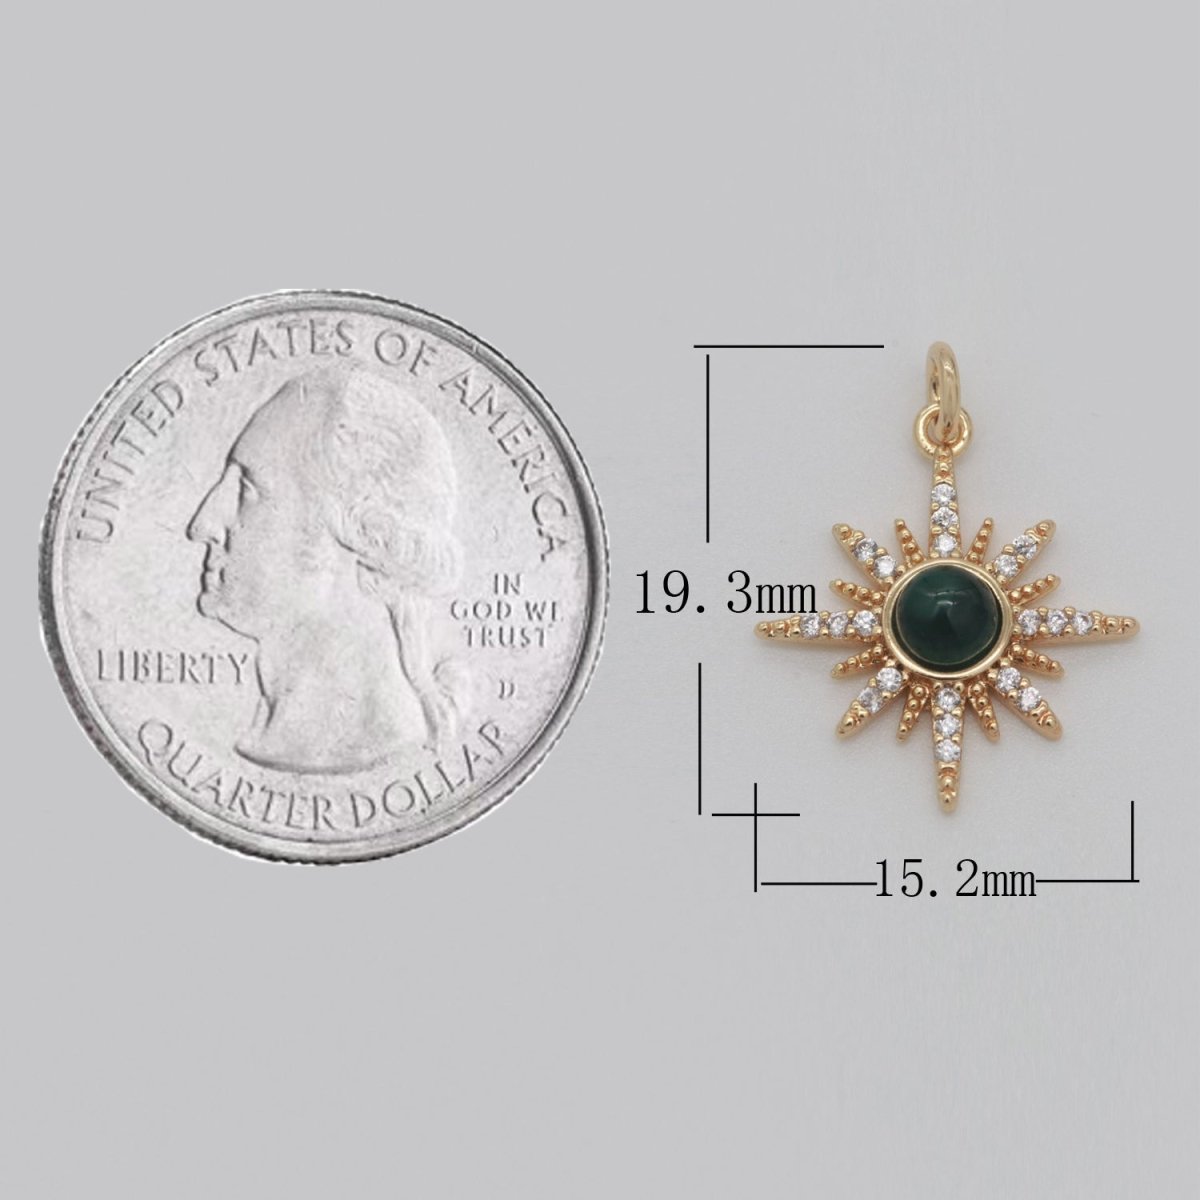 OS DEL-Dainty 18K Gold Filled Star Burst Charm Green CZ Round Star Medallion Pendant, 19.5x15.5mm, Micro Pave Gold Sun Celestial Jewelry | CL-M753 - DLUXCA